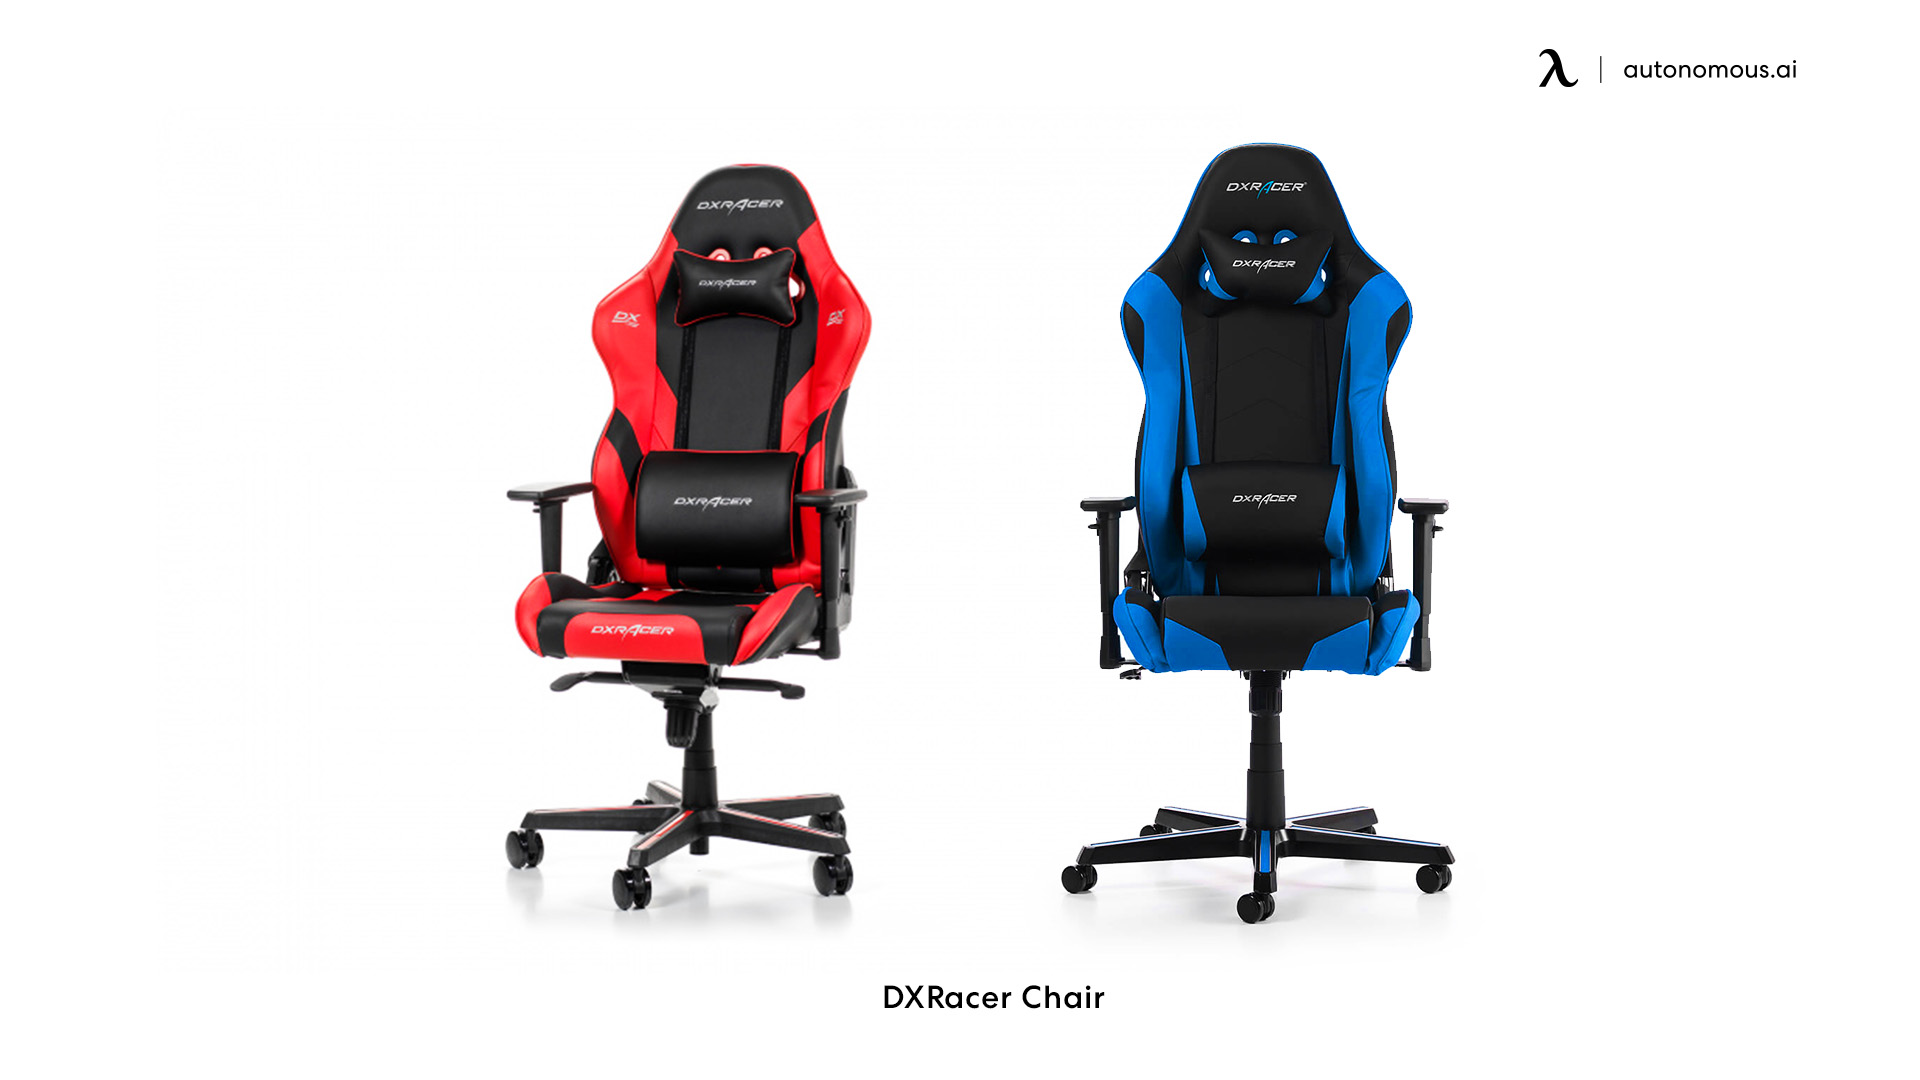 DXRacer Master Customizable gaming chair with tilt lock